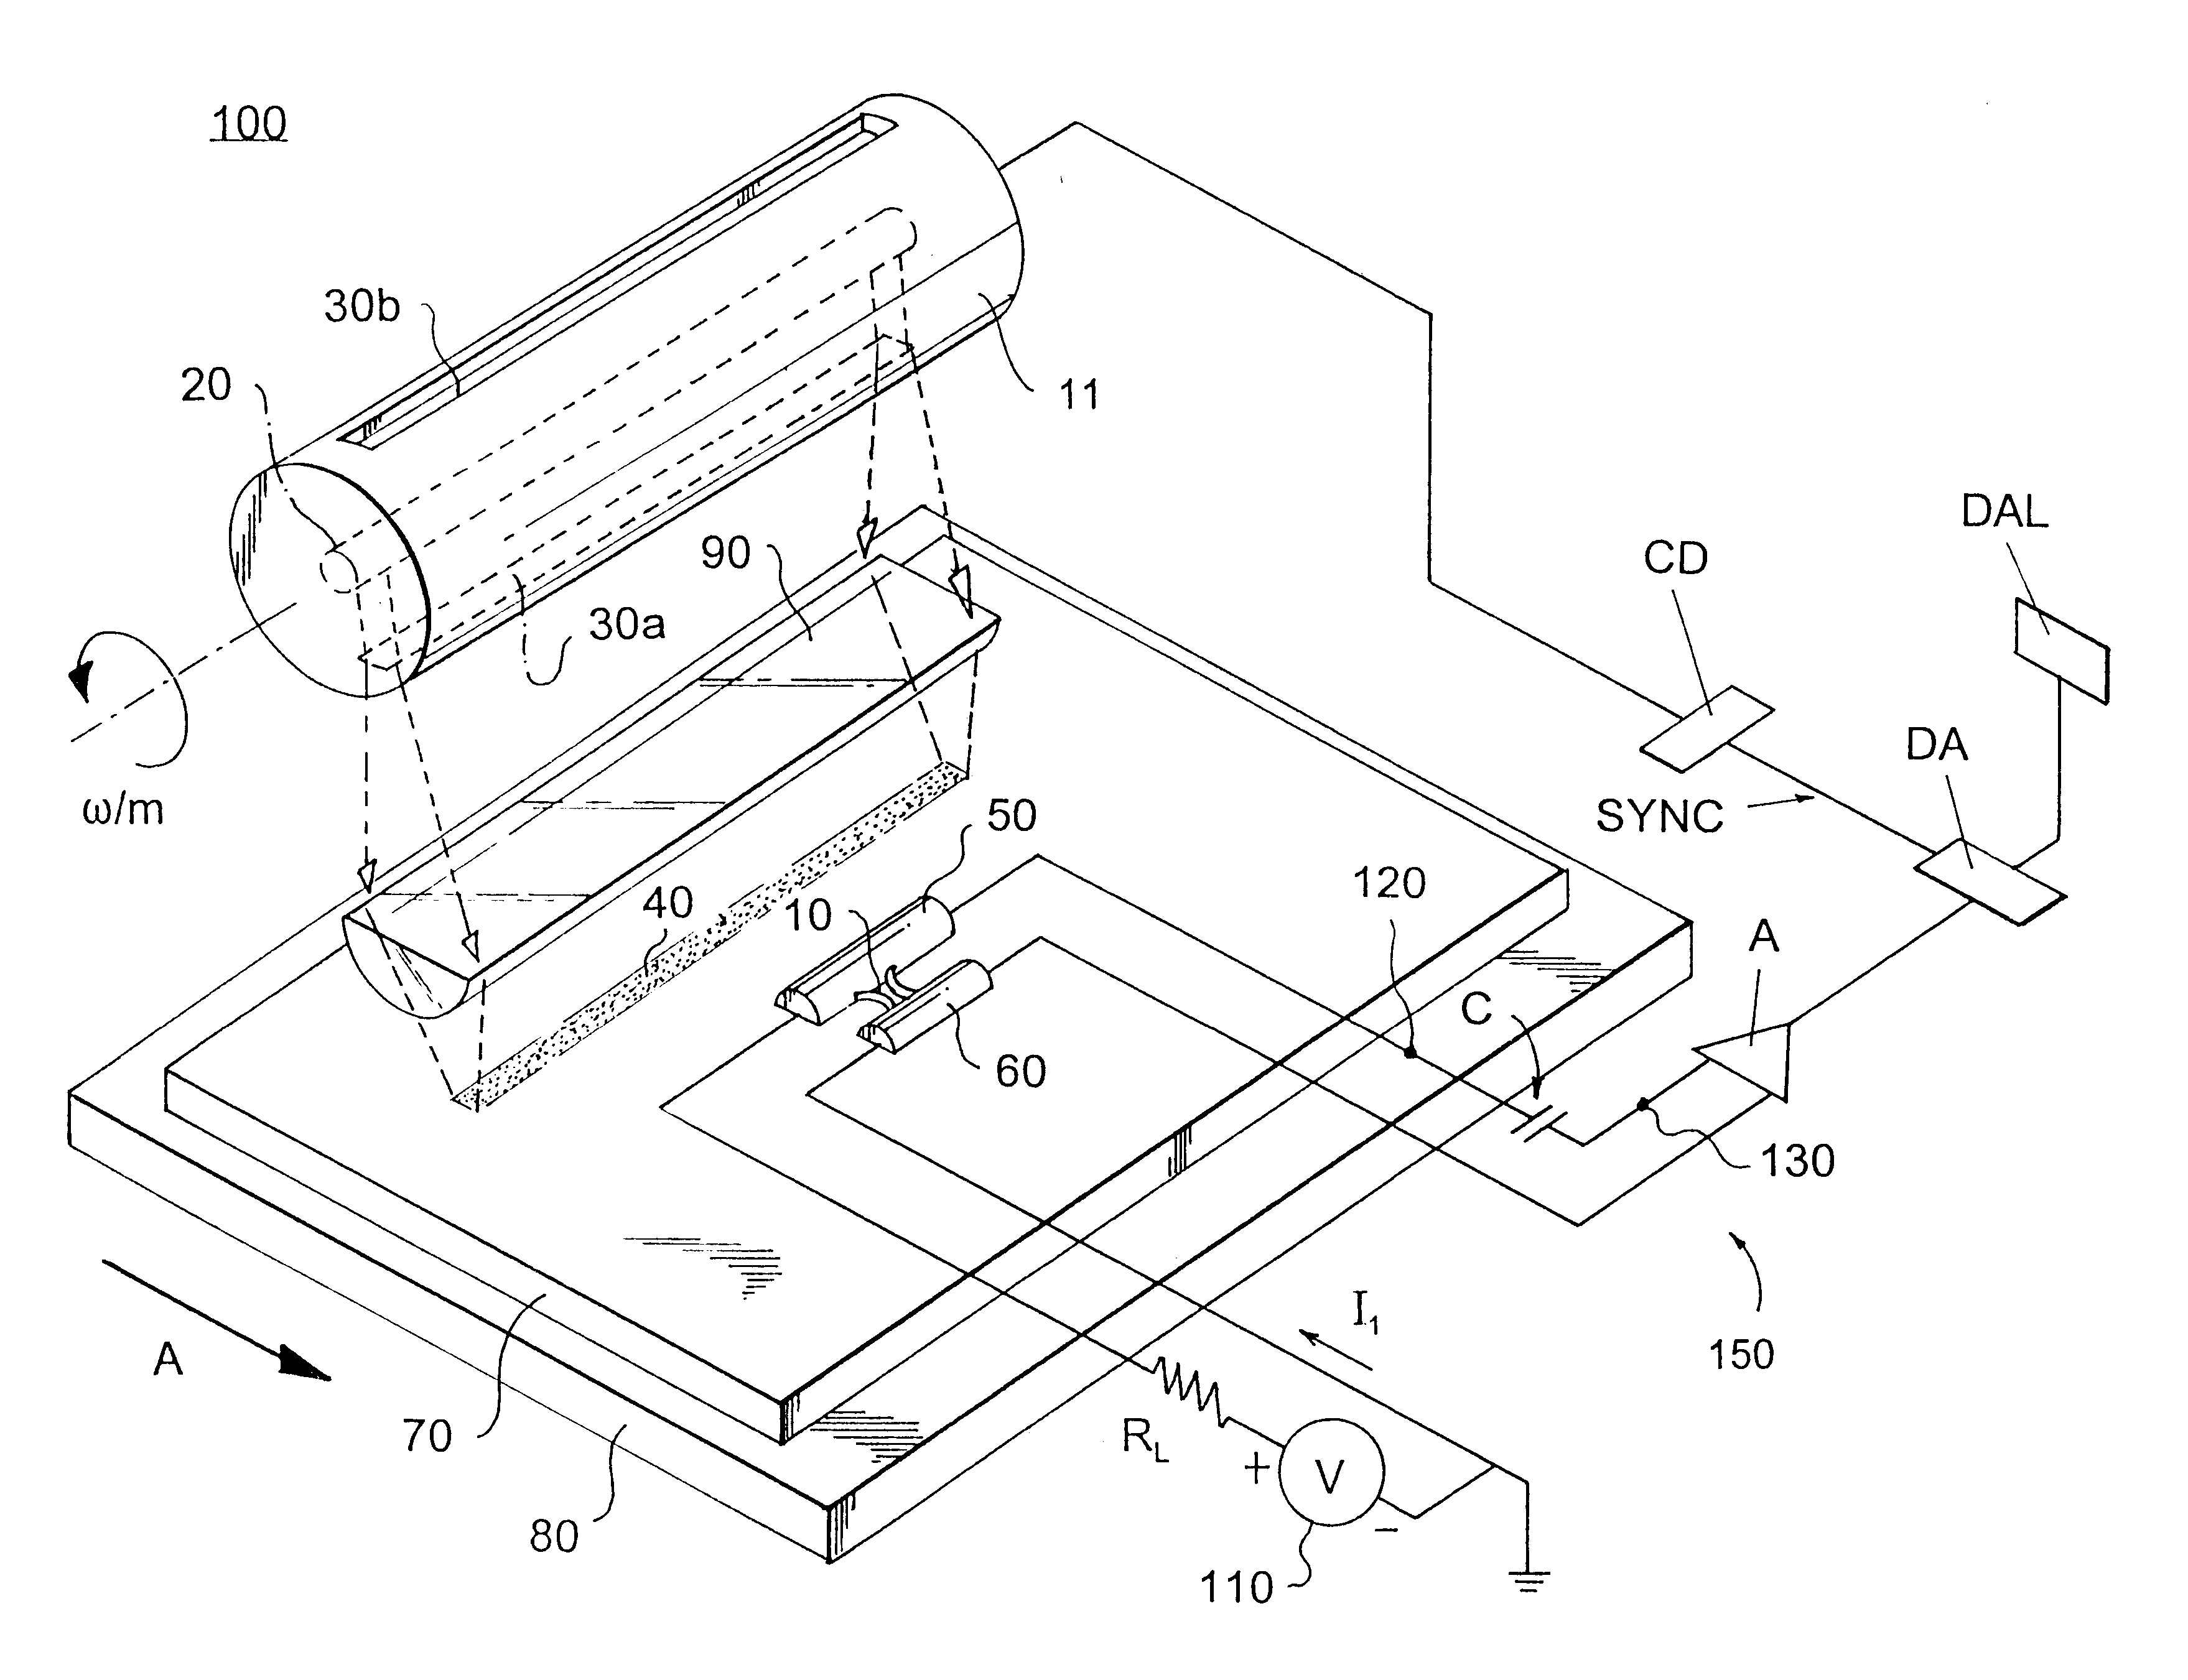 Thermal modulation system and method for locating a circuit defect such as a short or incipient open independent of a circuit geometry